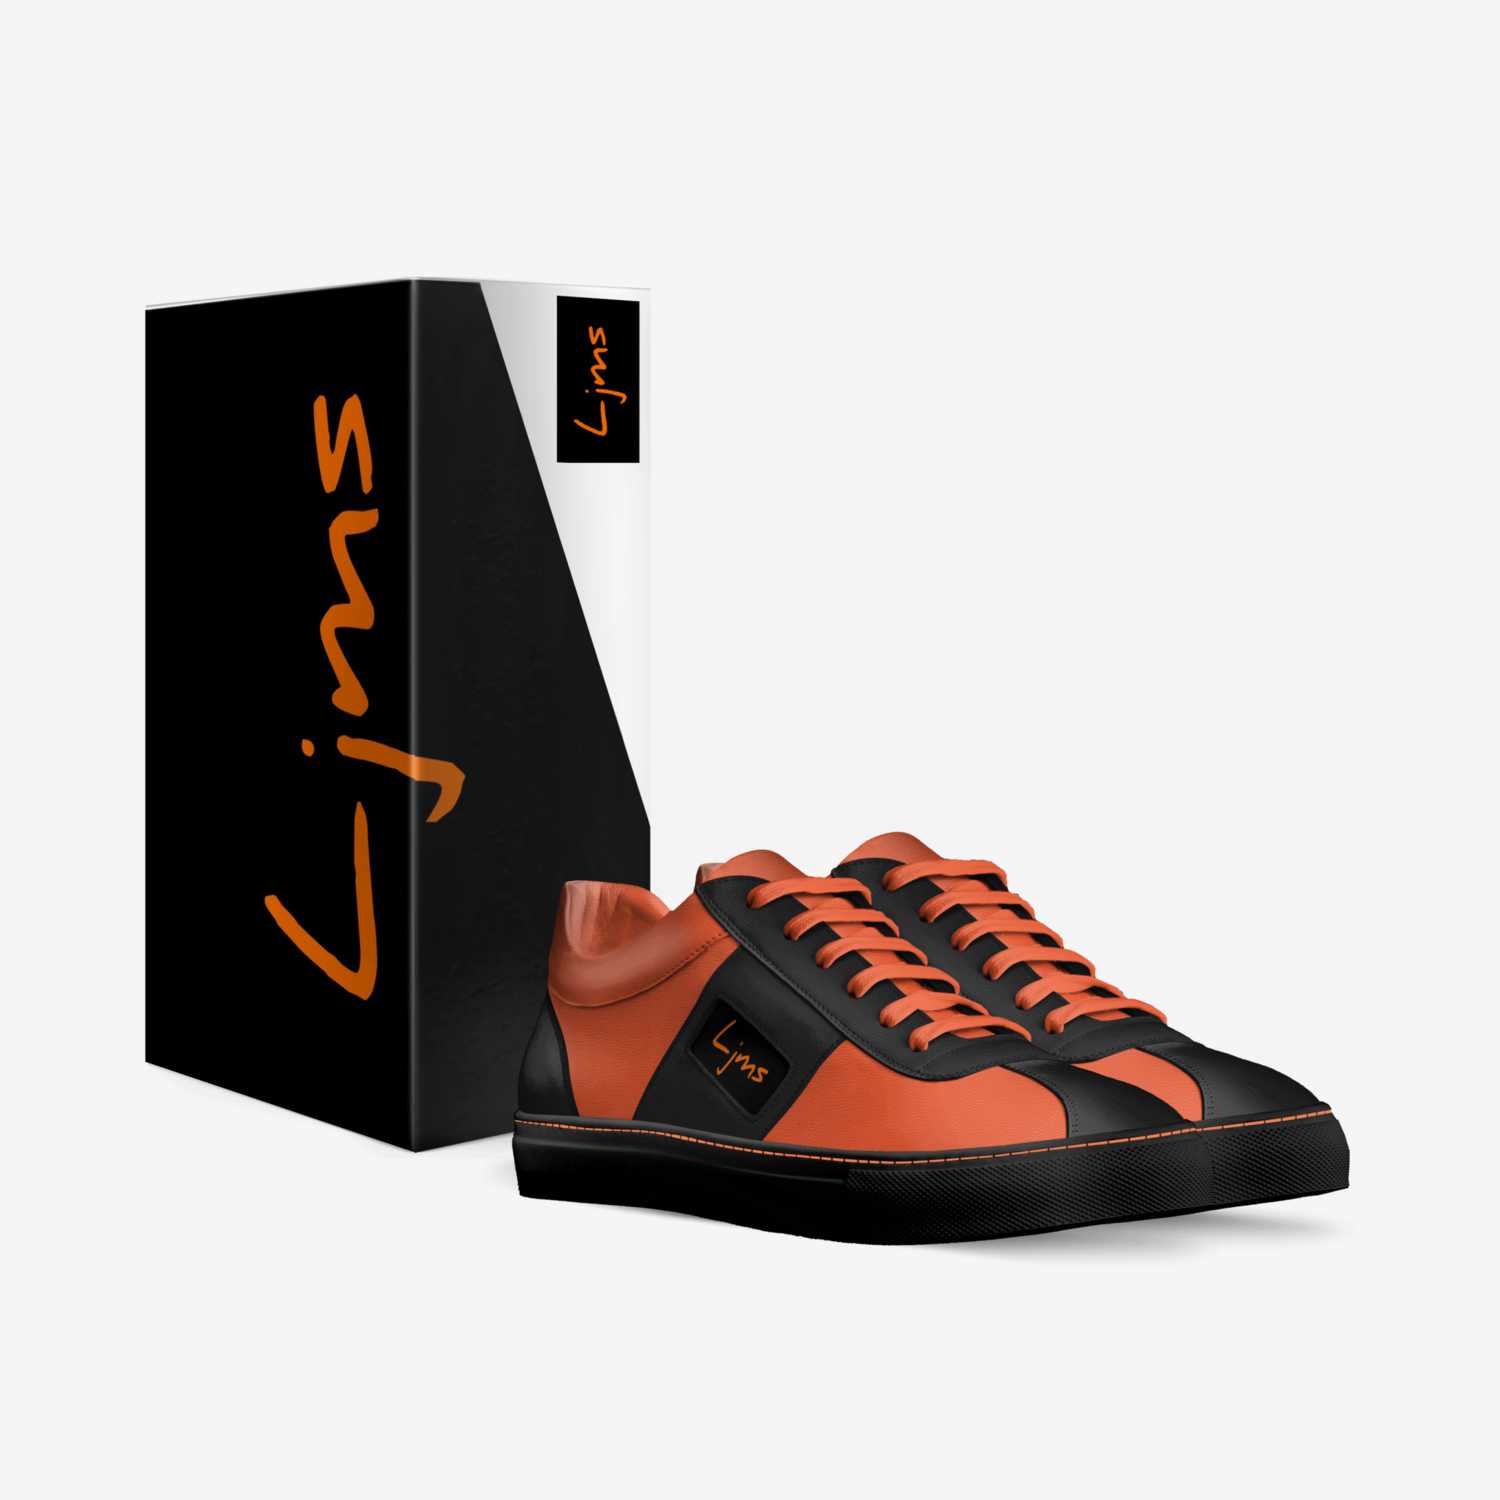 Ljms-MDine1 custom made in Italy shoes by Ljms Fashion | Box view